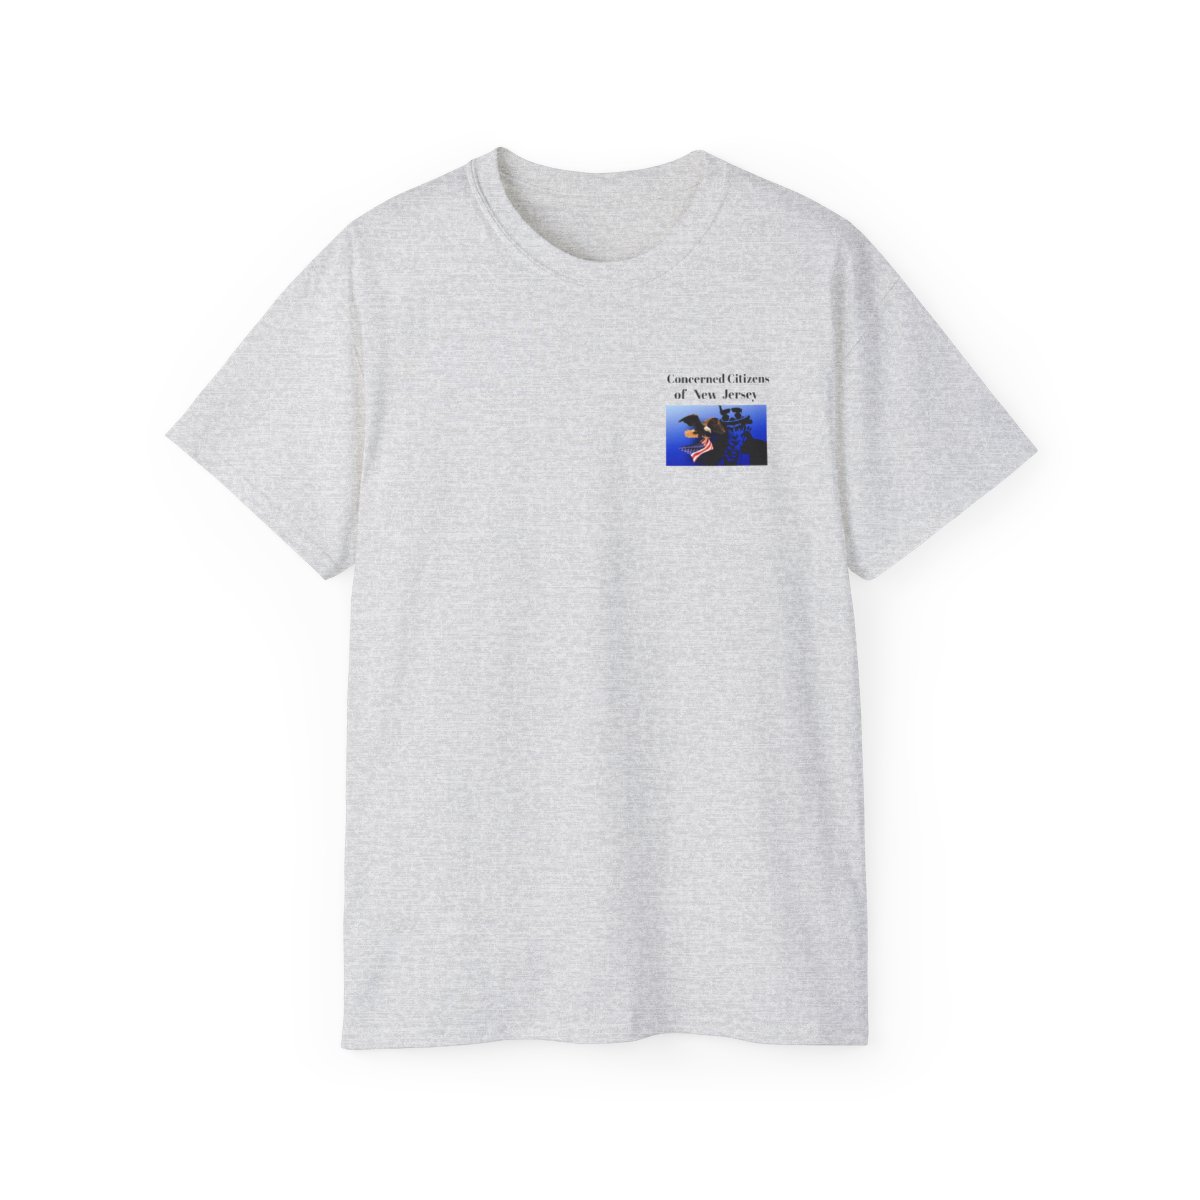 mens FRONT (concerned citizens + blue logo), BACK (motto) product thumbnail image